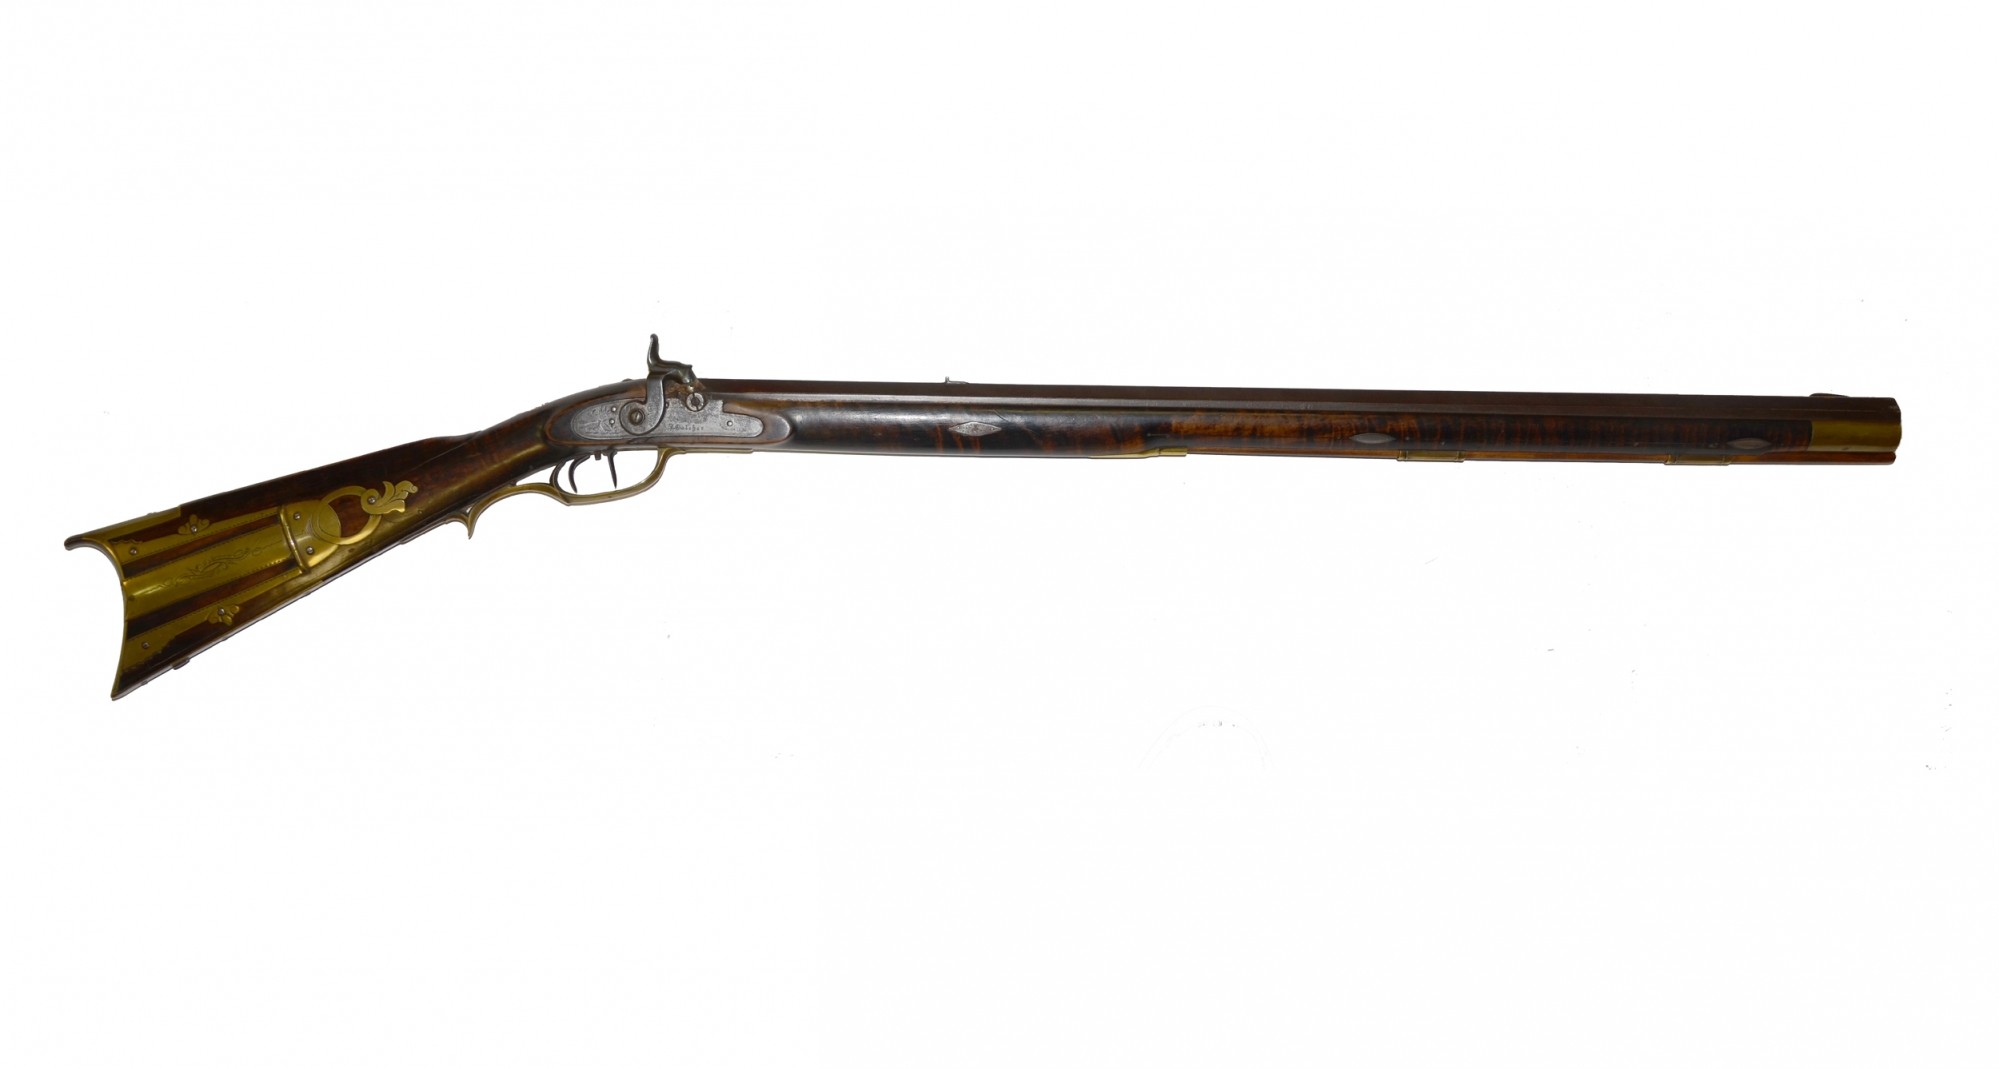 FULL STOCK HEAVY BARRELED KENTUCKY RIFLE ATTRIBUTED TO JAMES H